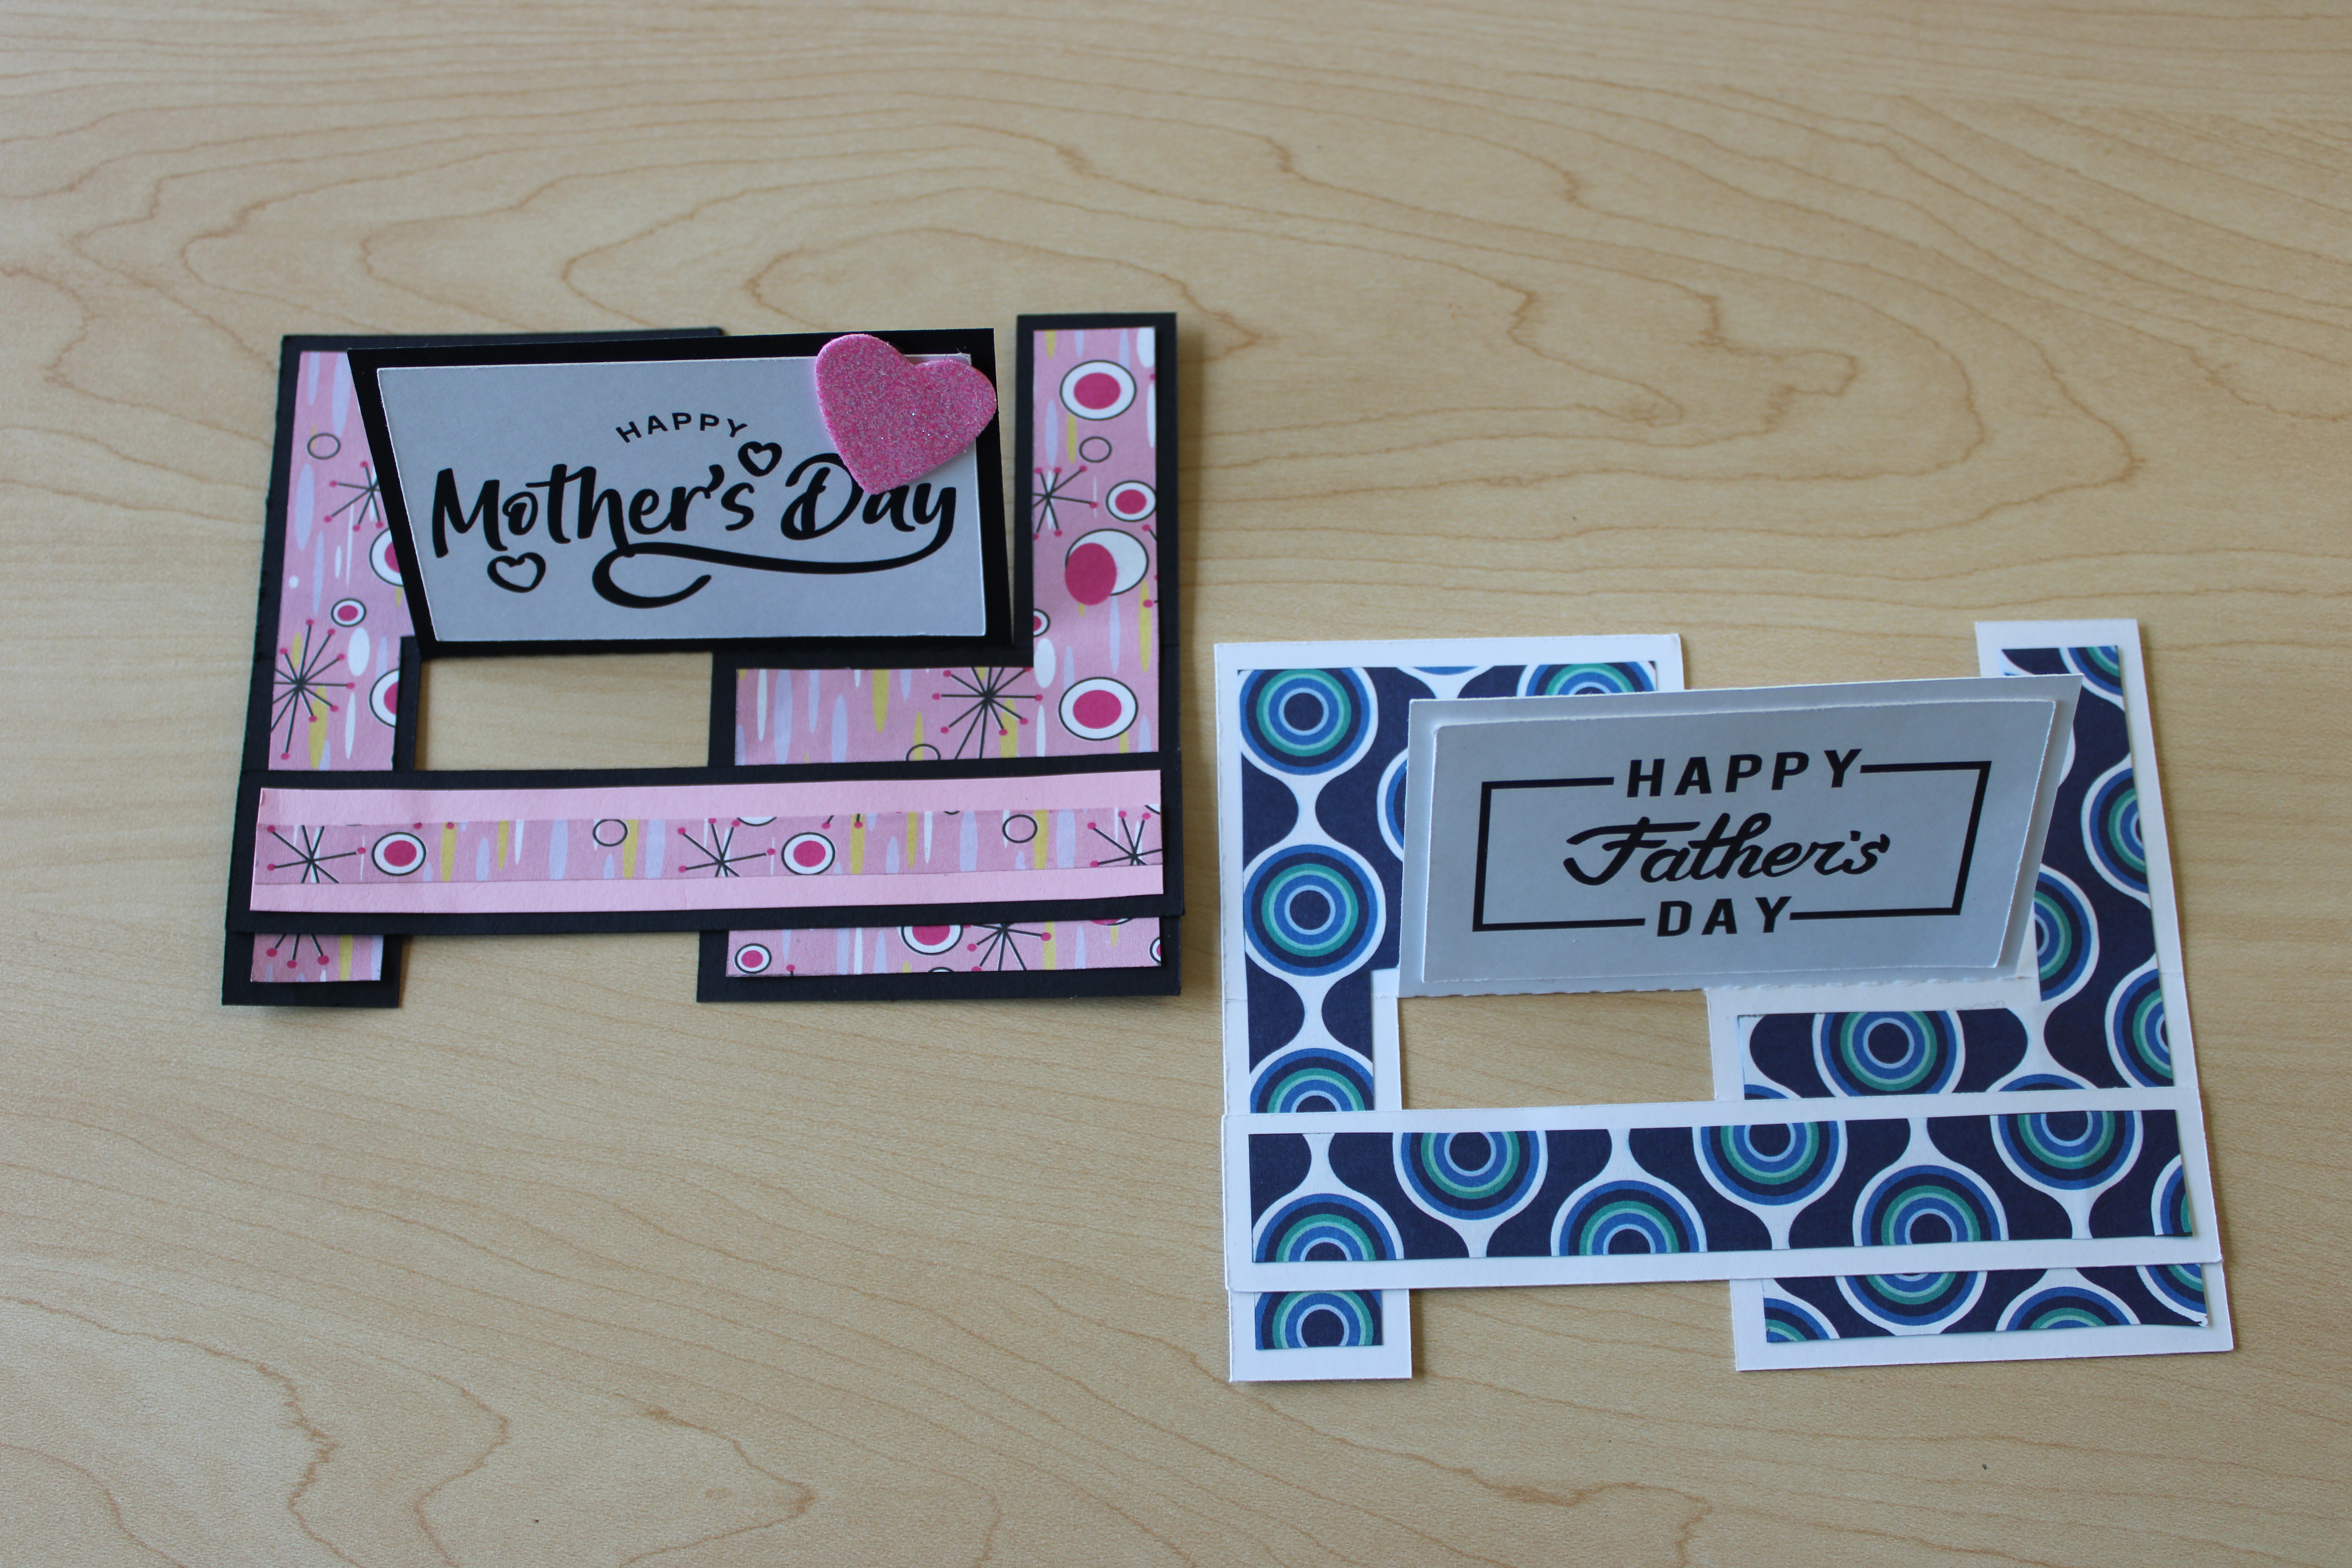 Mother's Day and Father's Day greeting cards